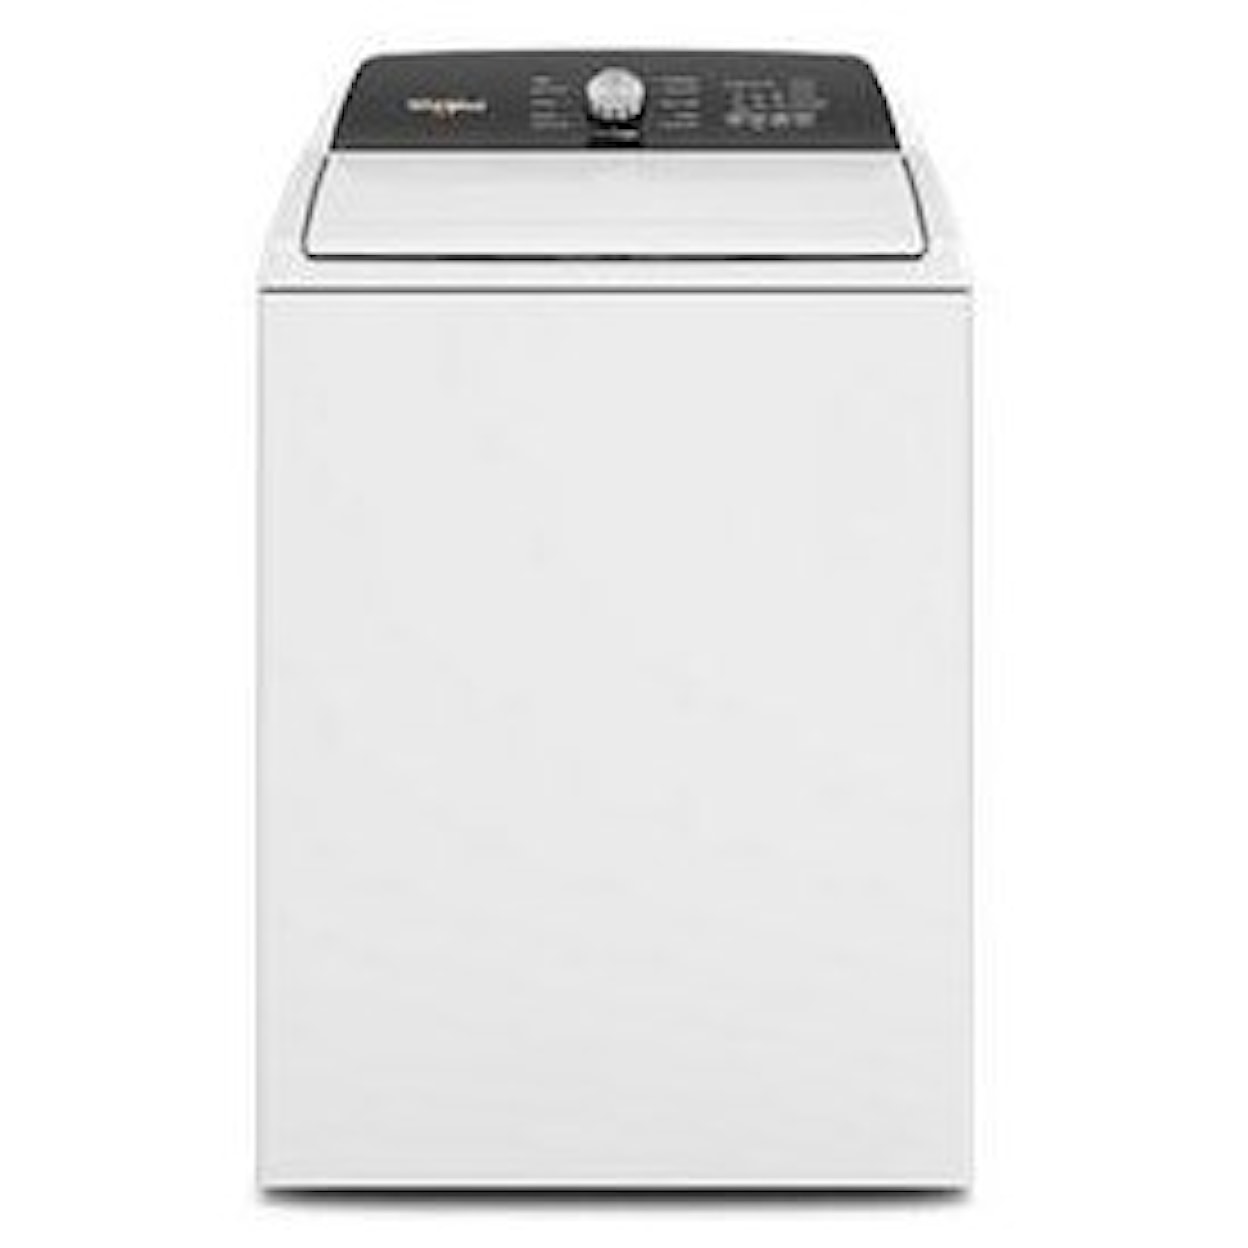 Whirlpool Washers 4.6 TOP LOAD WASHER